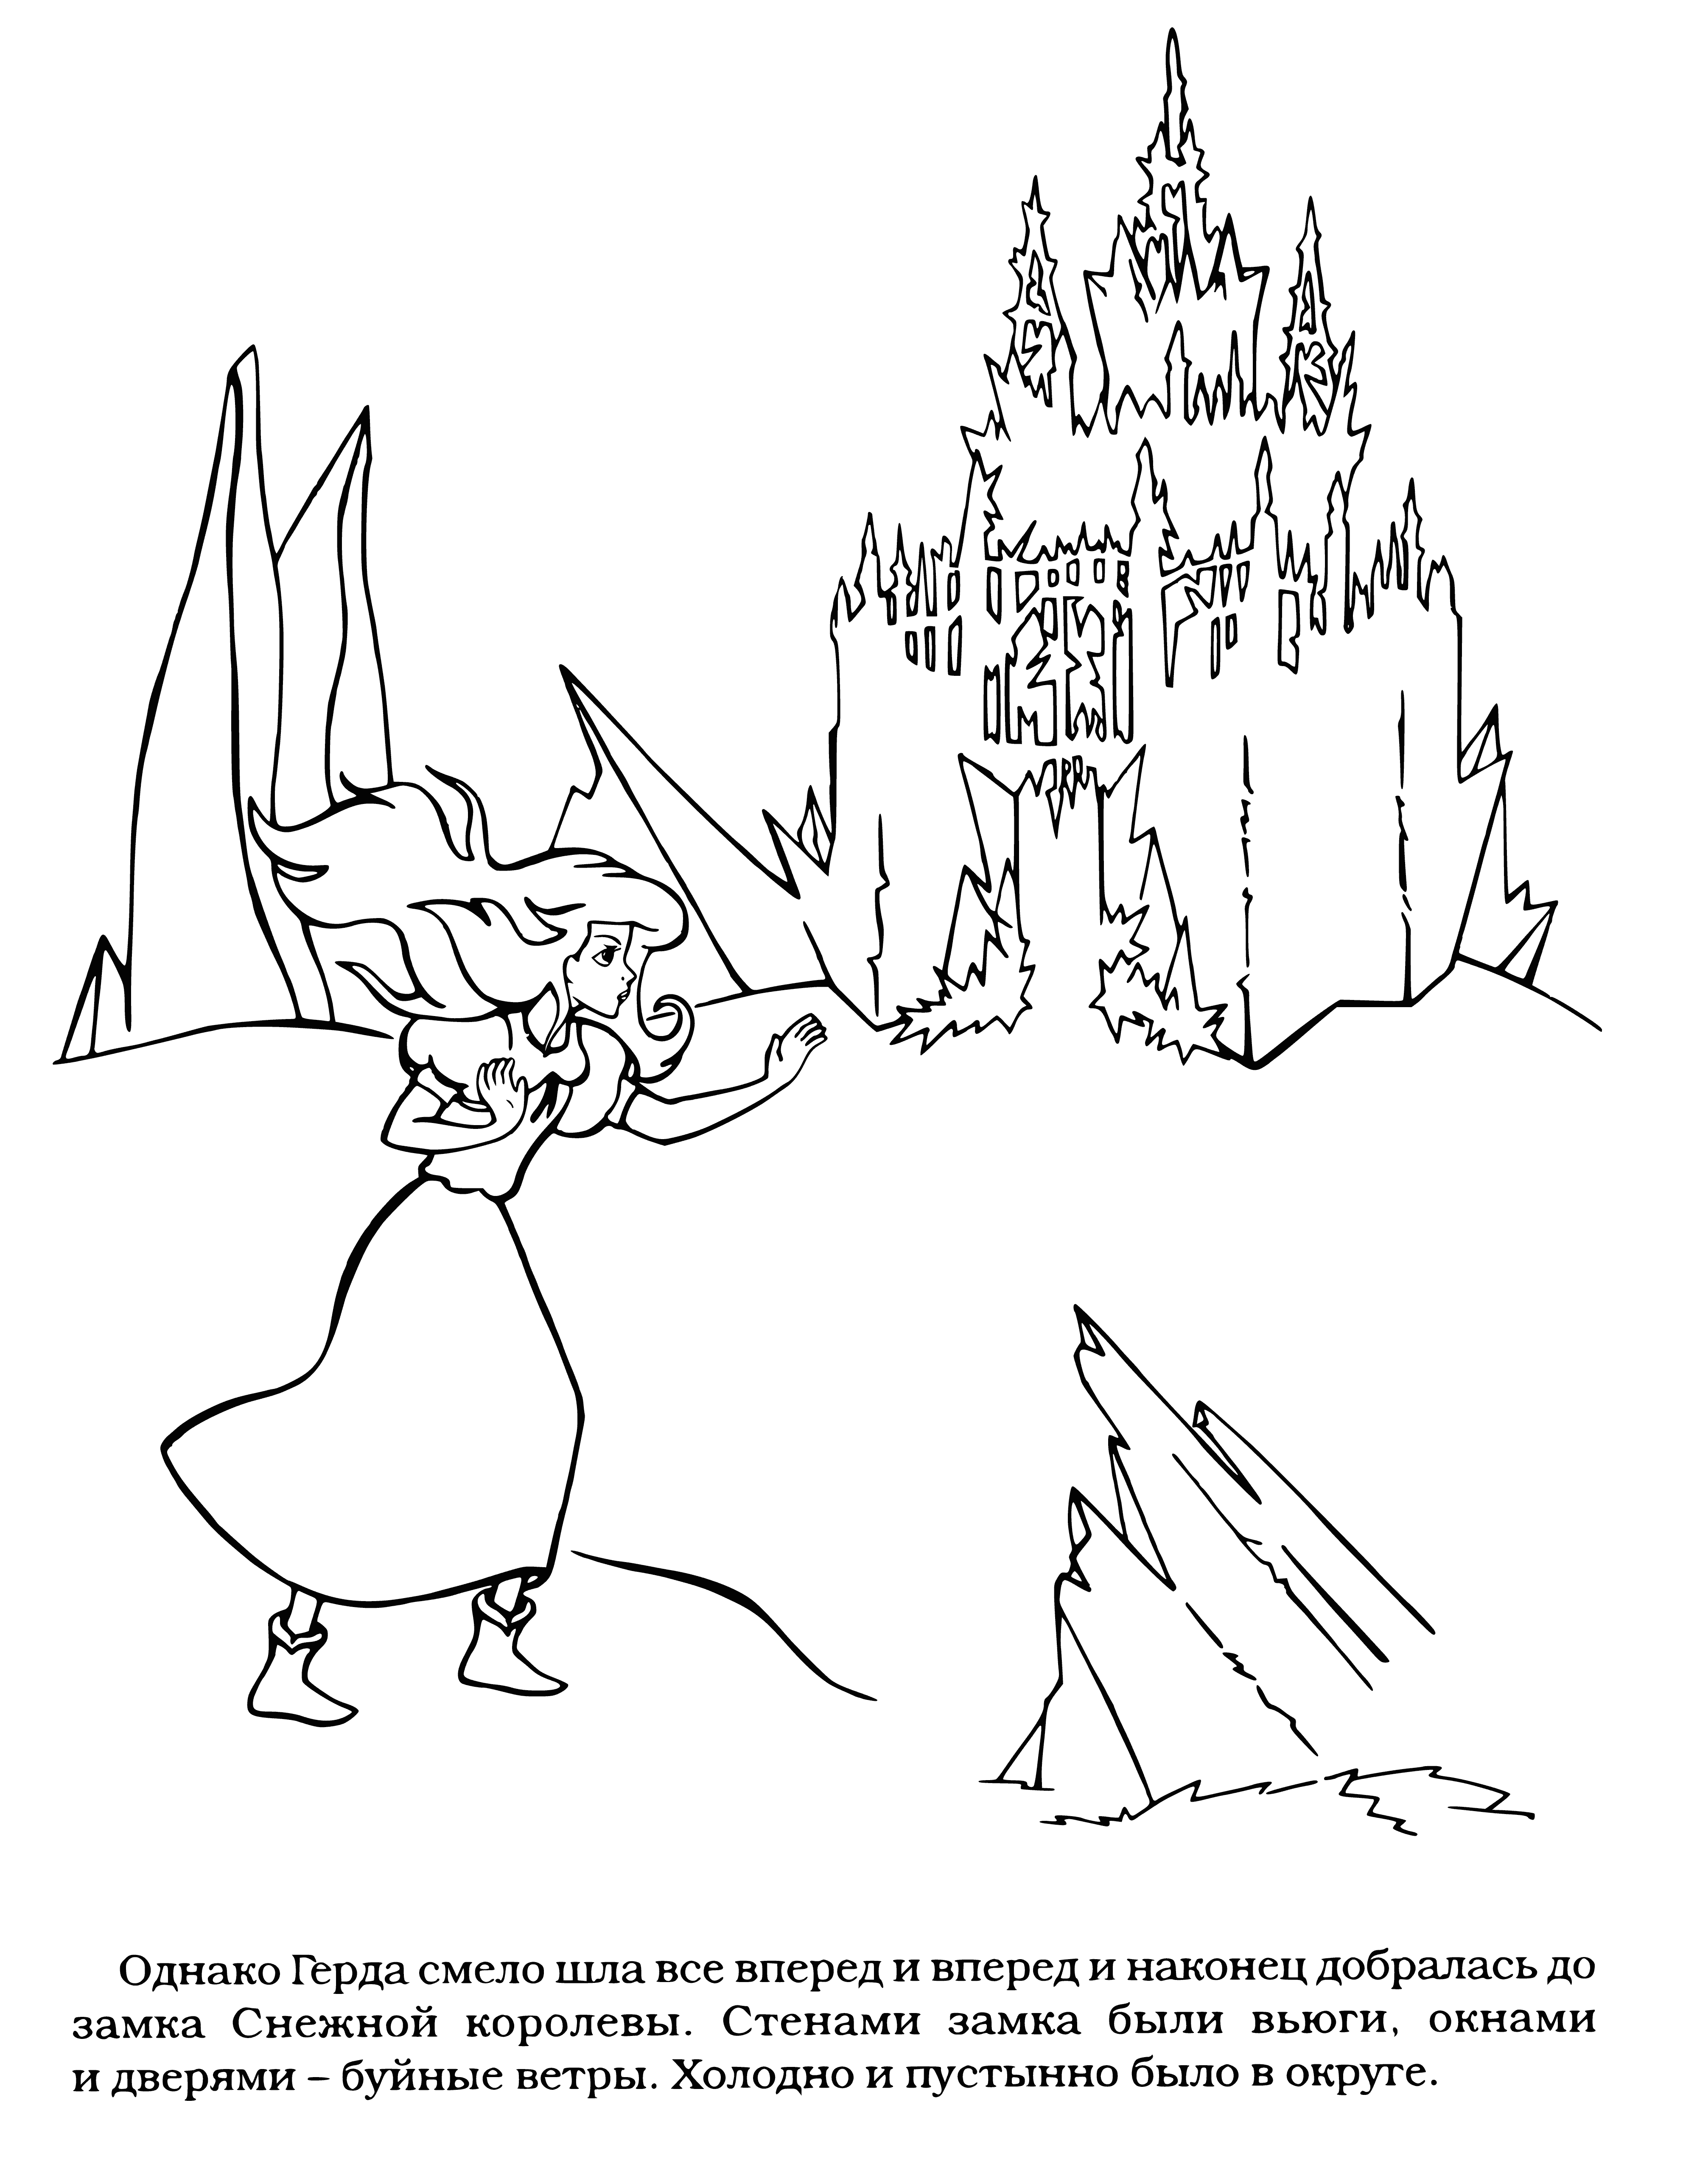 coloring page: Snow and ice castle with turrets, bridge and distant mountains create a magical scene.